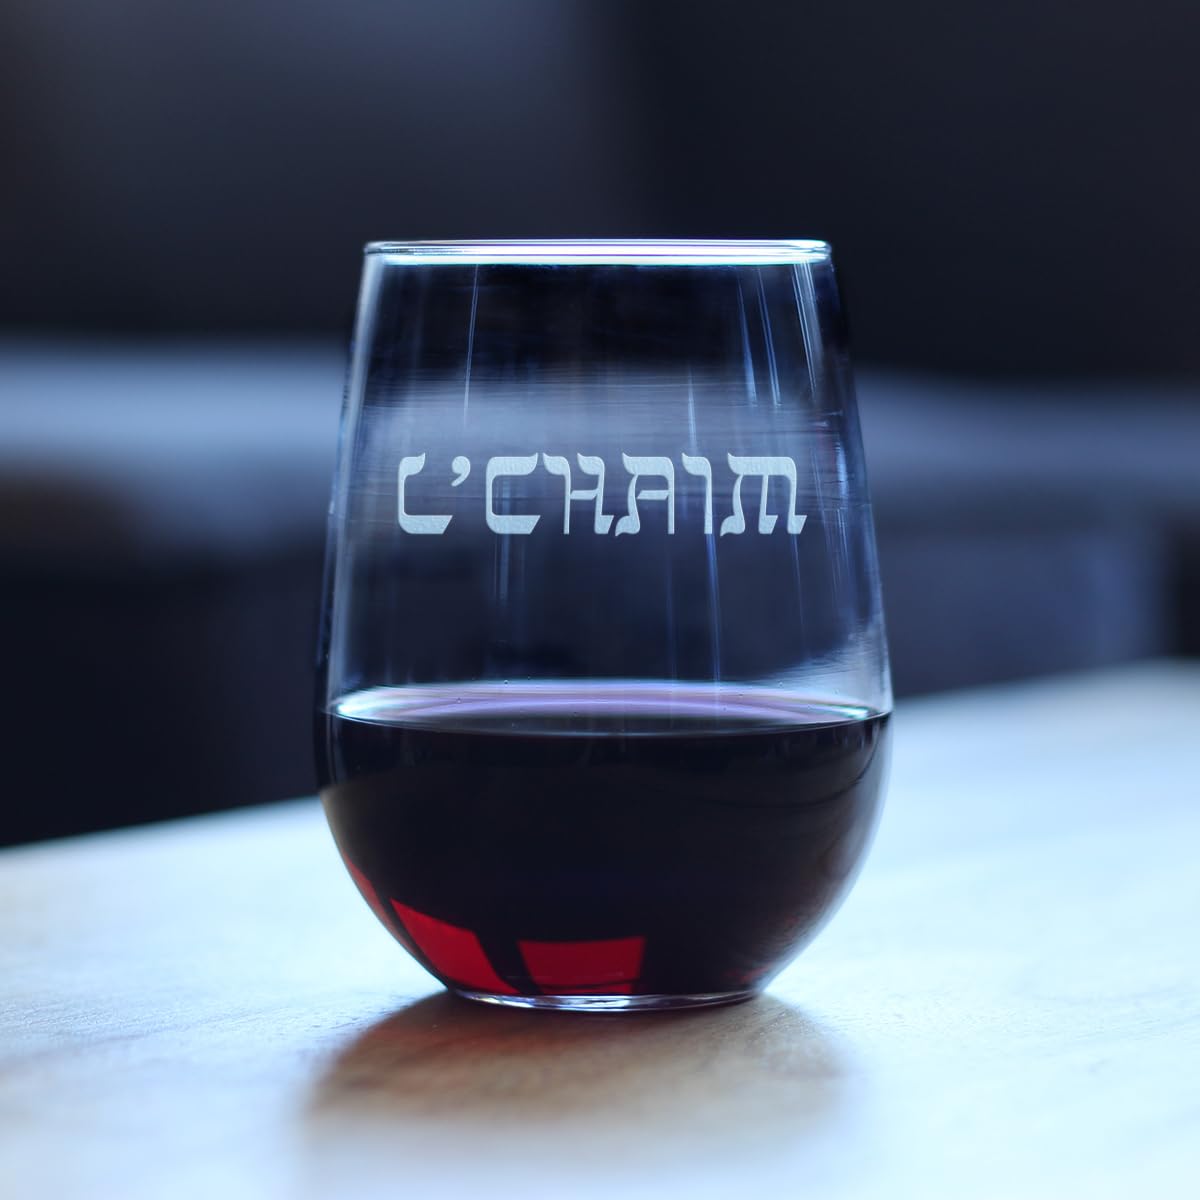 L'Chaim - Hebrew Cheers Stemless Wine Glass - Fun Jewish Gifts or Party Decor for Women & Men - Large 17 Oz Glasses